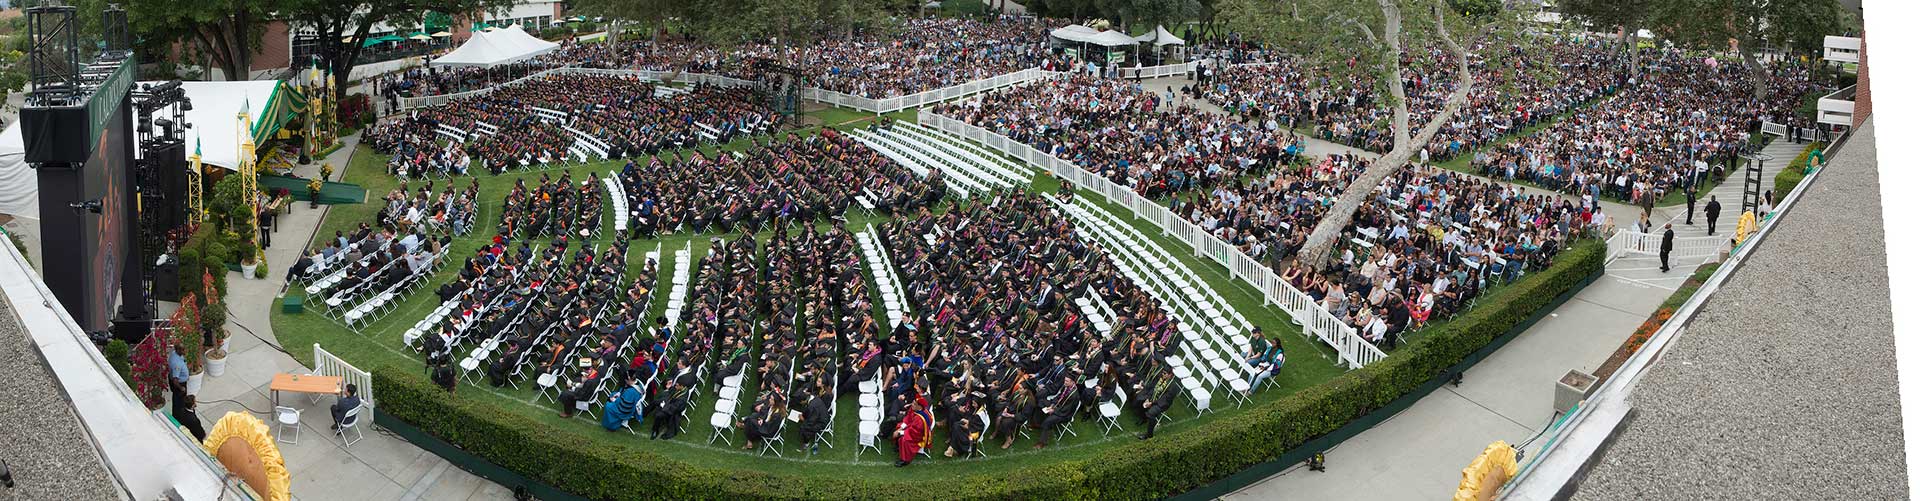 Rooftop view of the 2017 commencement ceremony